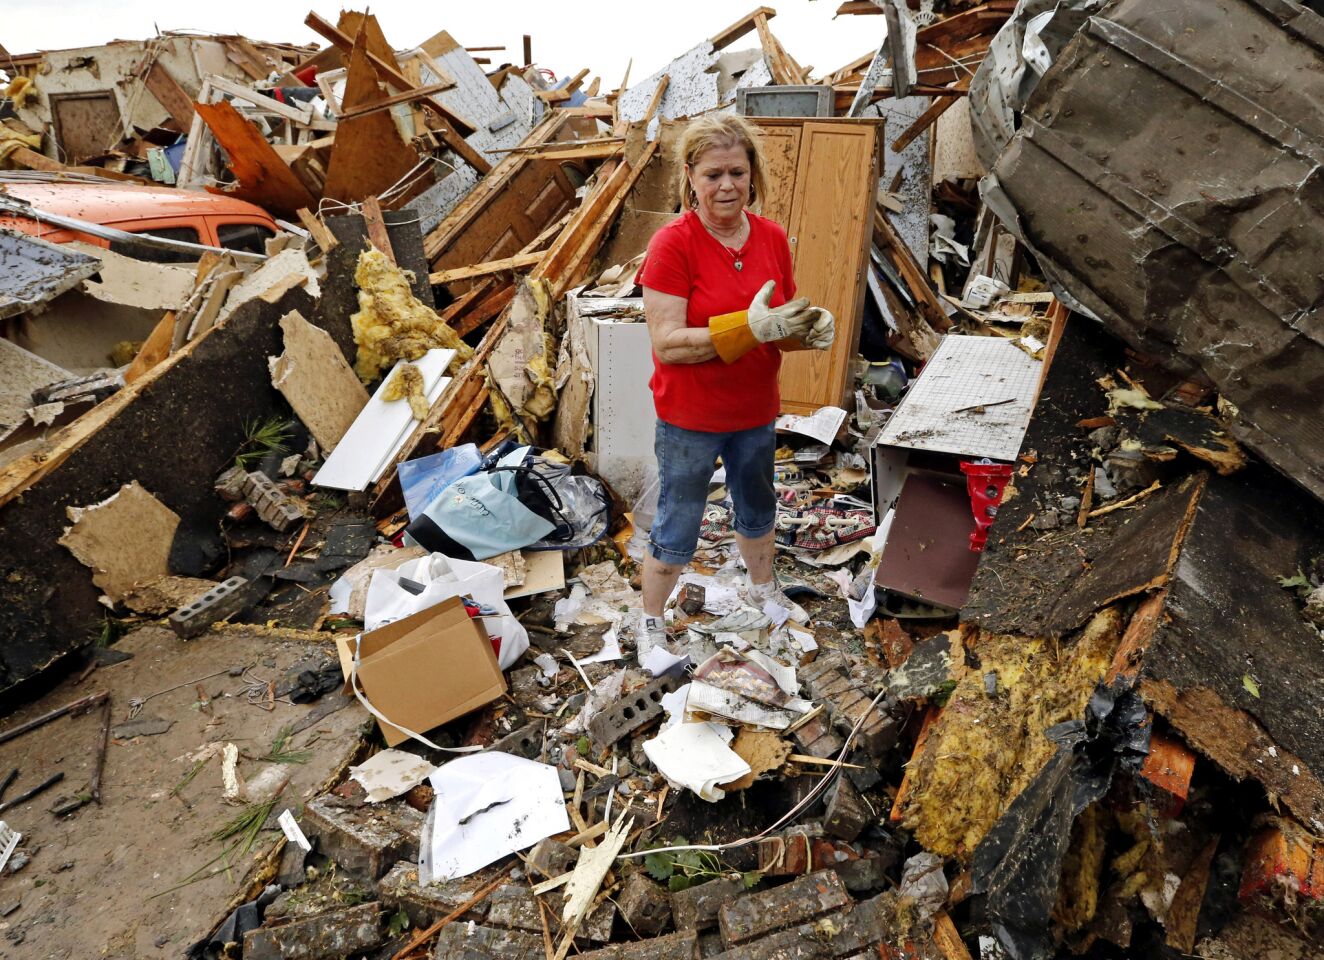 JoAnn Anderson sorts through the rubble of her home after a tornado in Moore, Okla.